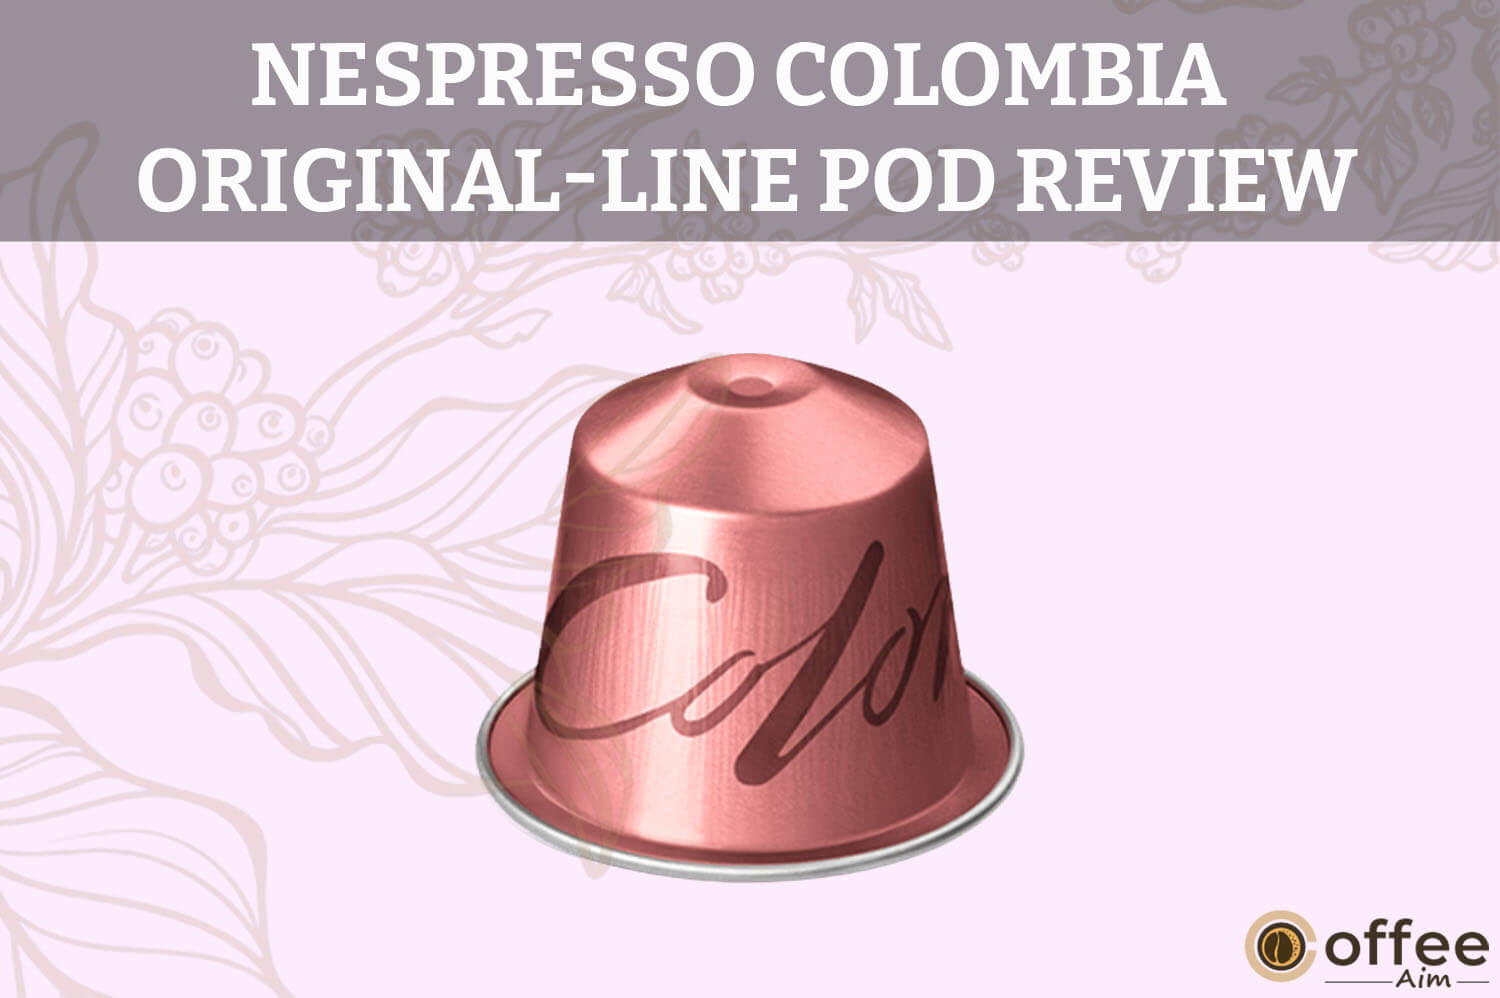 Featured image for the article "Nespresso Colombia OriginalLine Pod Review"